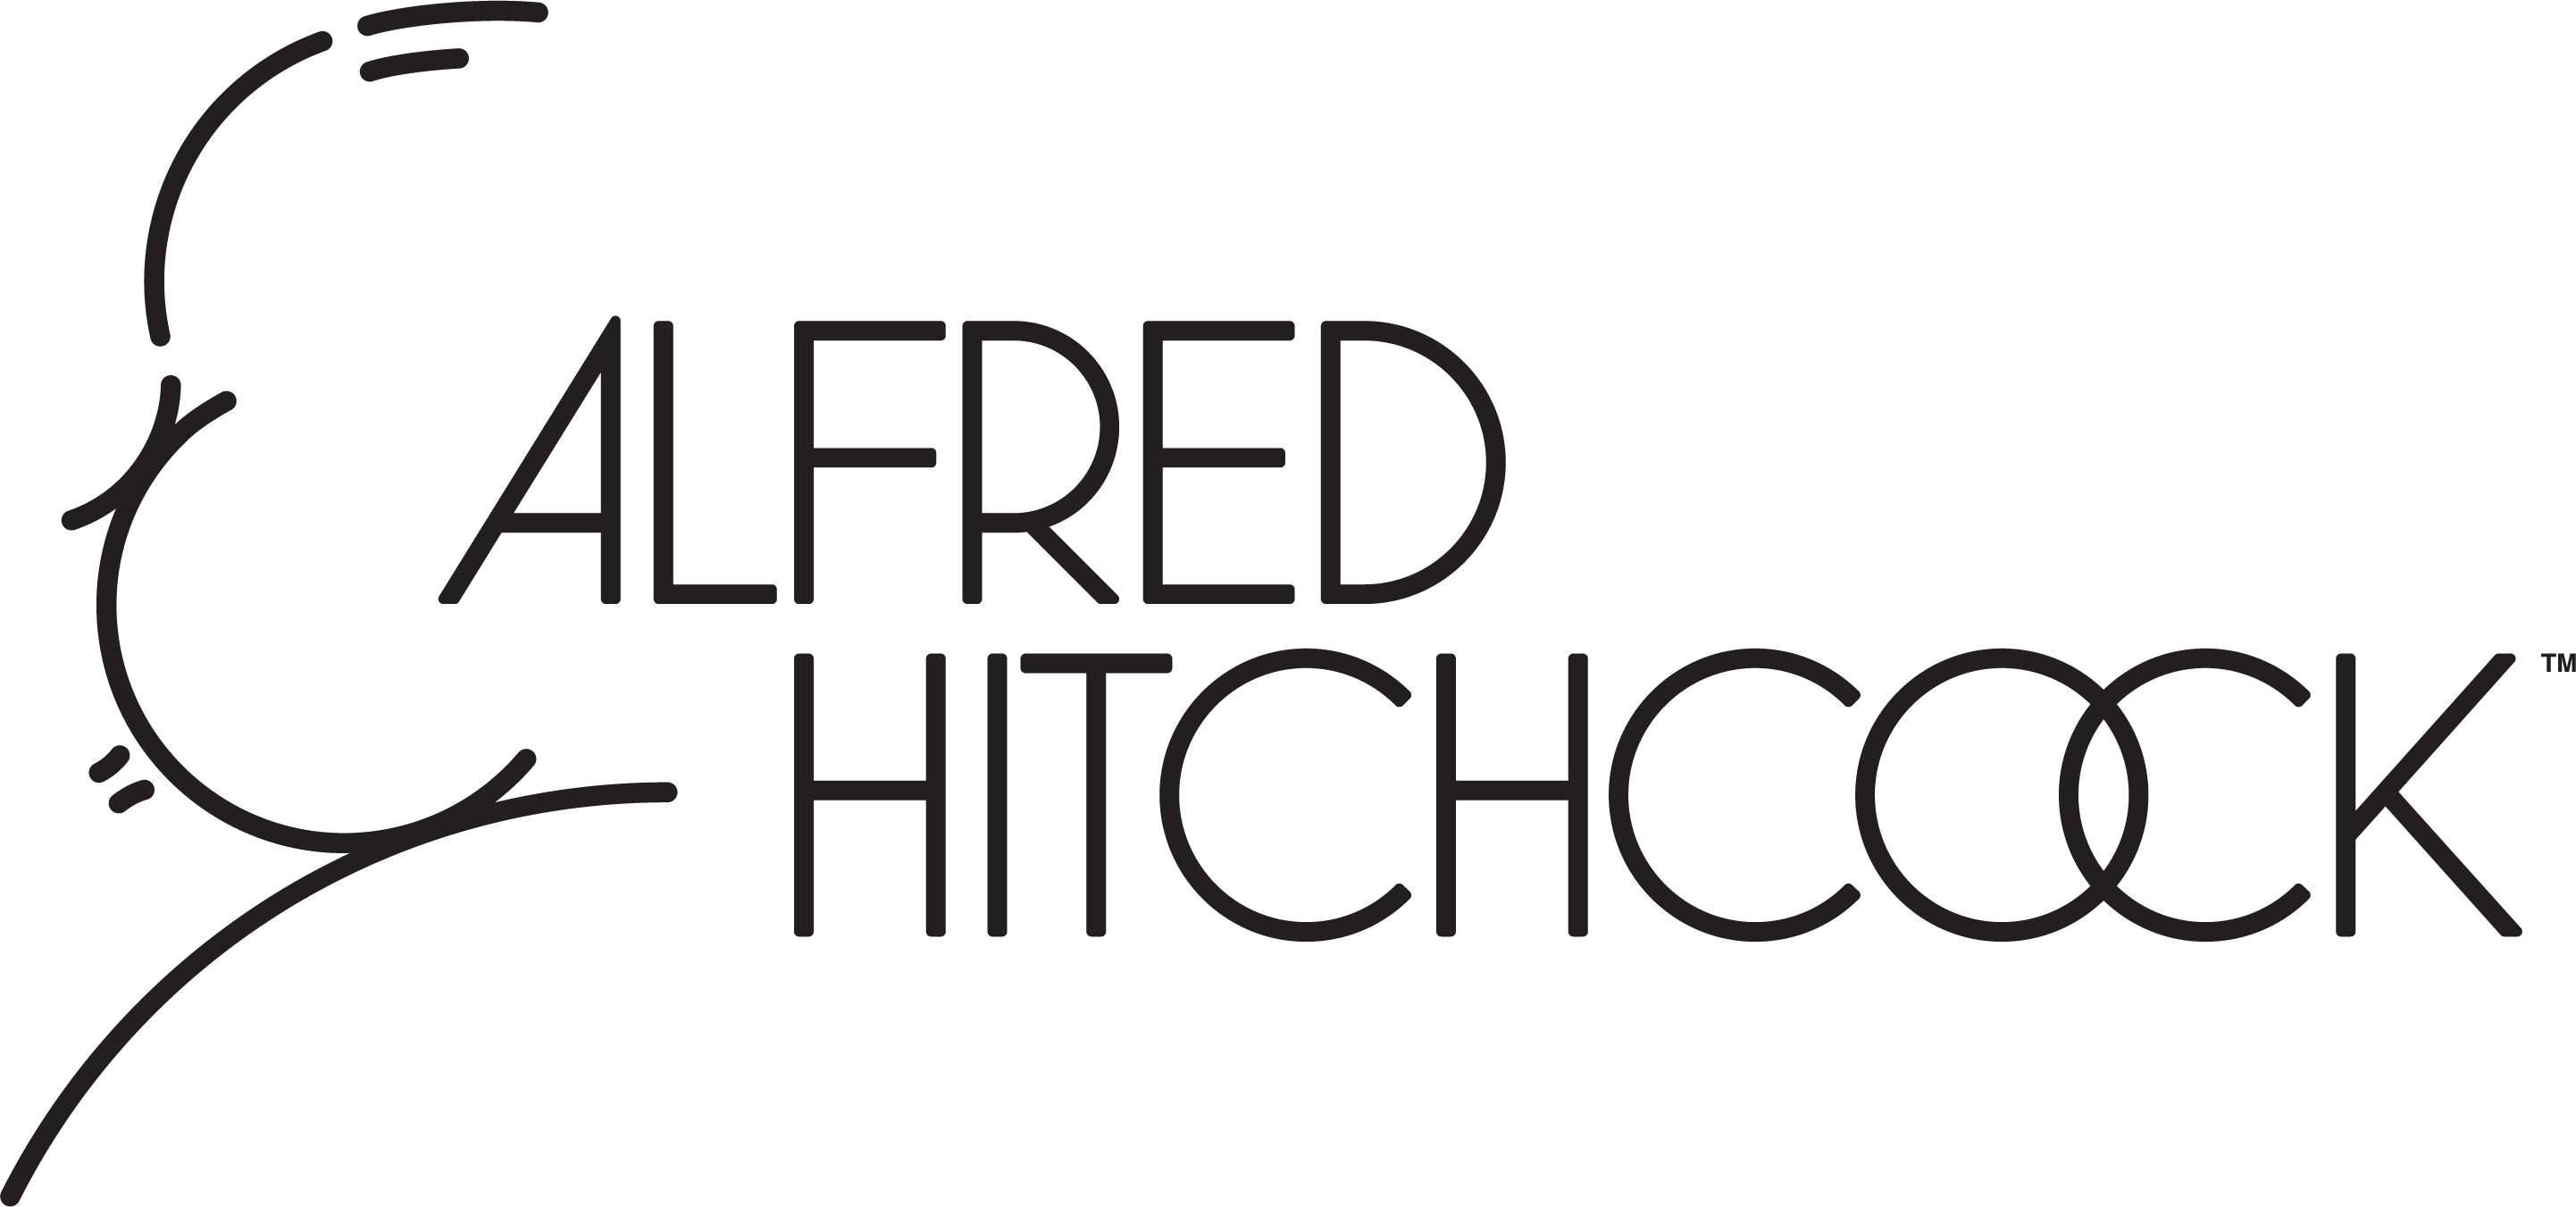 Red Bubble Logo - Guidelines: Alfred Hitchcock – Redbubble